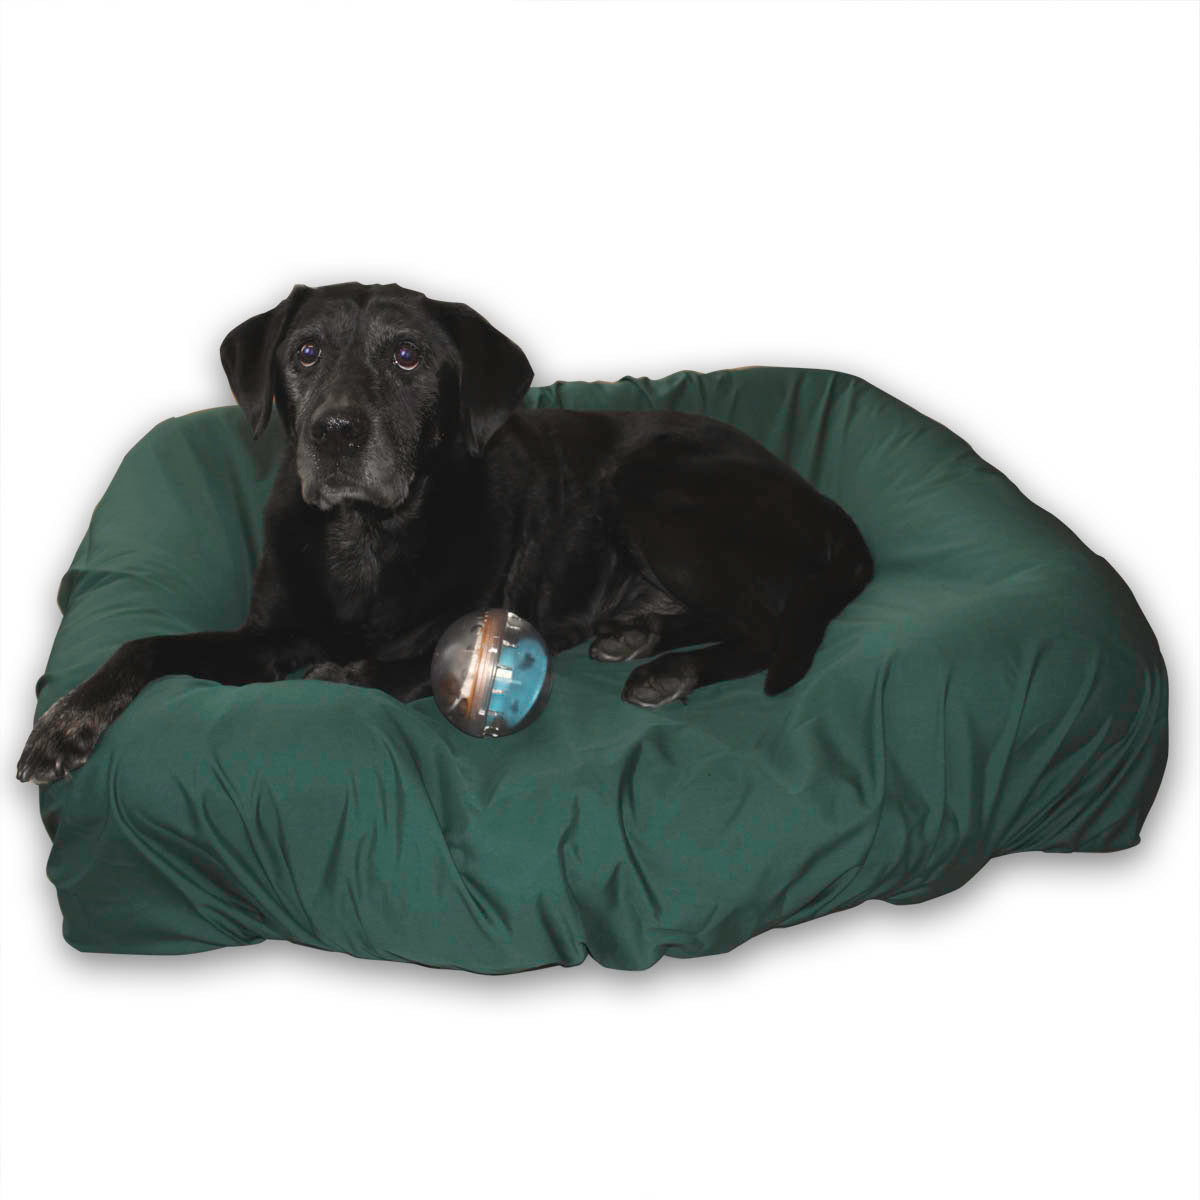 PawSheets® Special Offers - Discounted Items